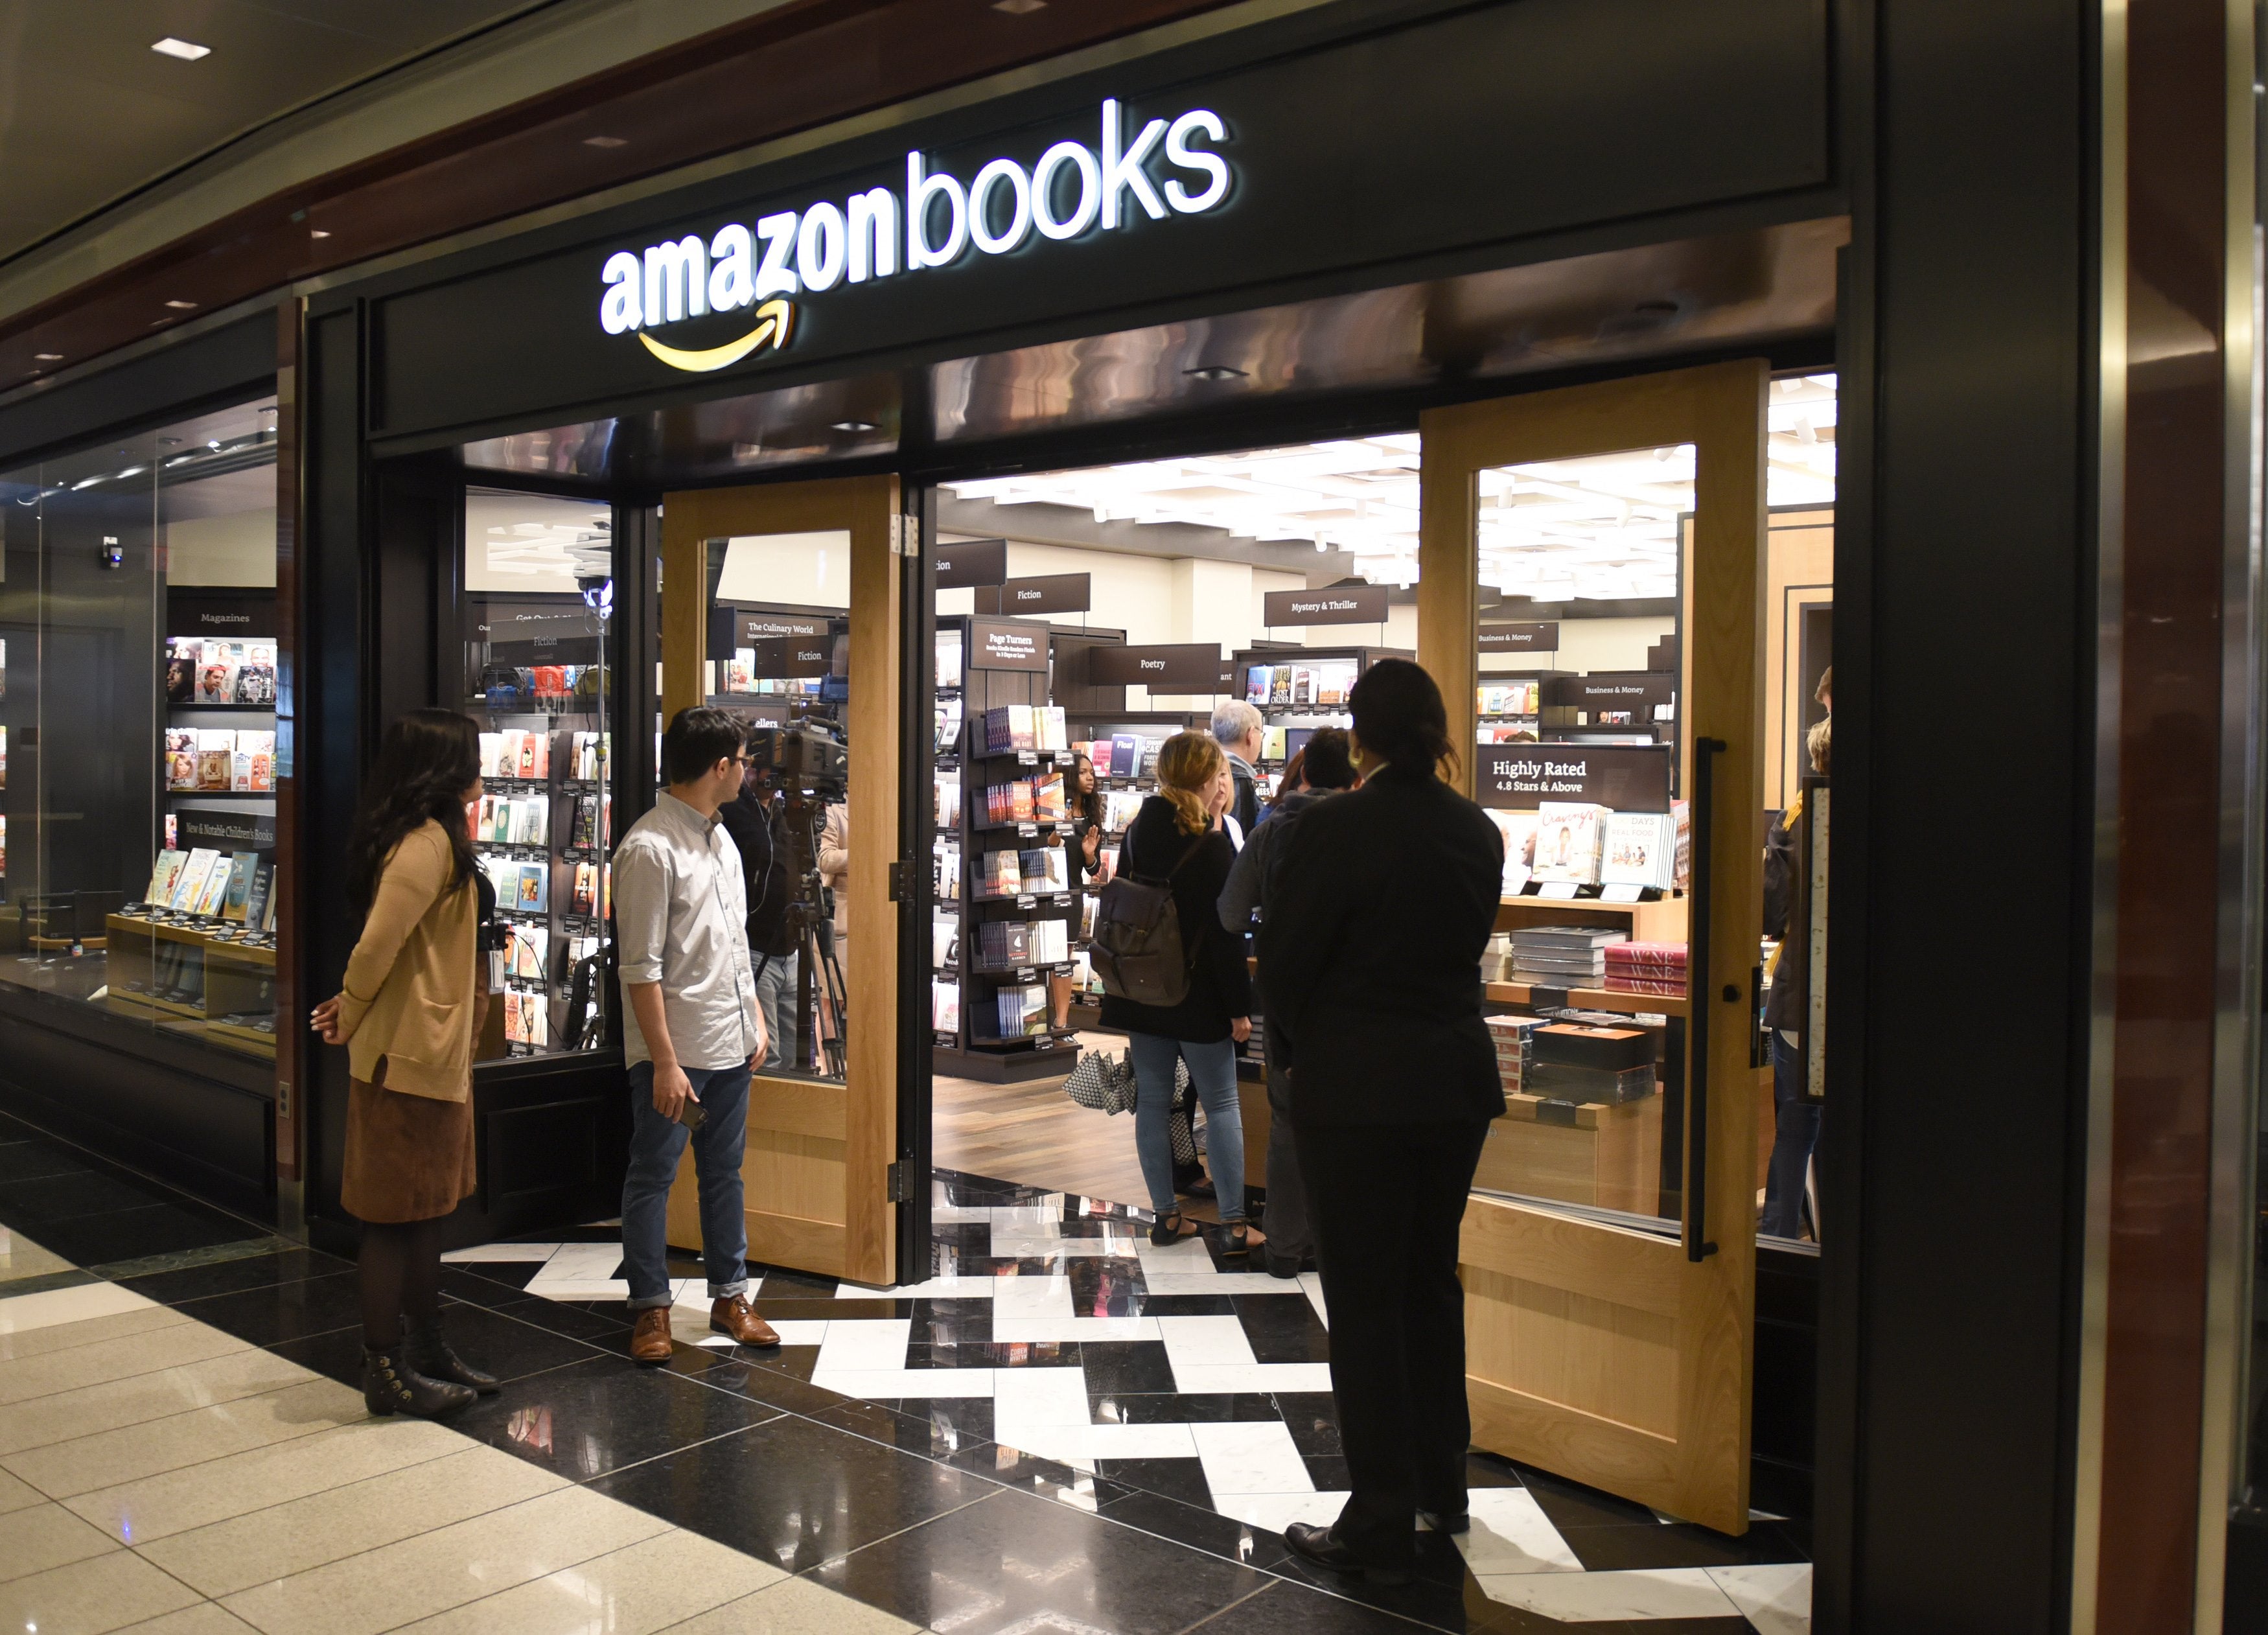 Customers arrive at Amazon Books in Manhattan's Time Warner Center on May 25, 2017 as the online retailing giant Amazon.com Inc. opens its first New York City bookstore.